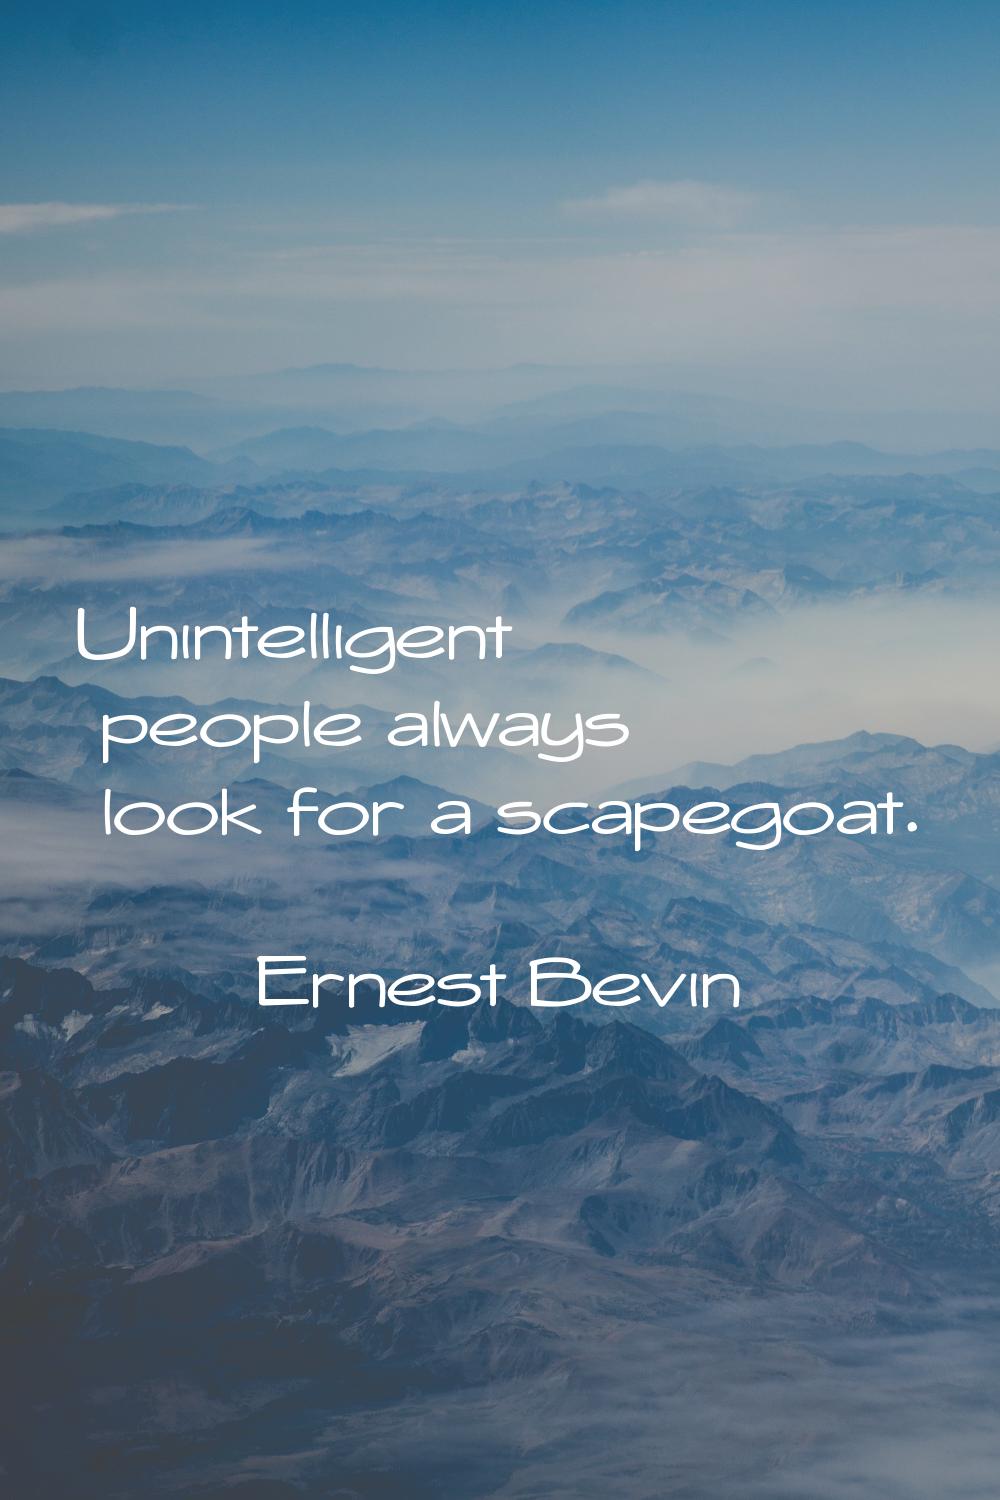 Unintelligent people always look for a scapegoat.